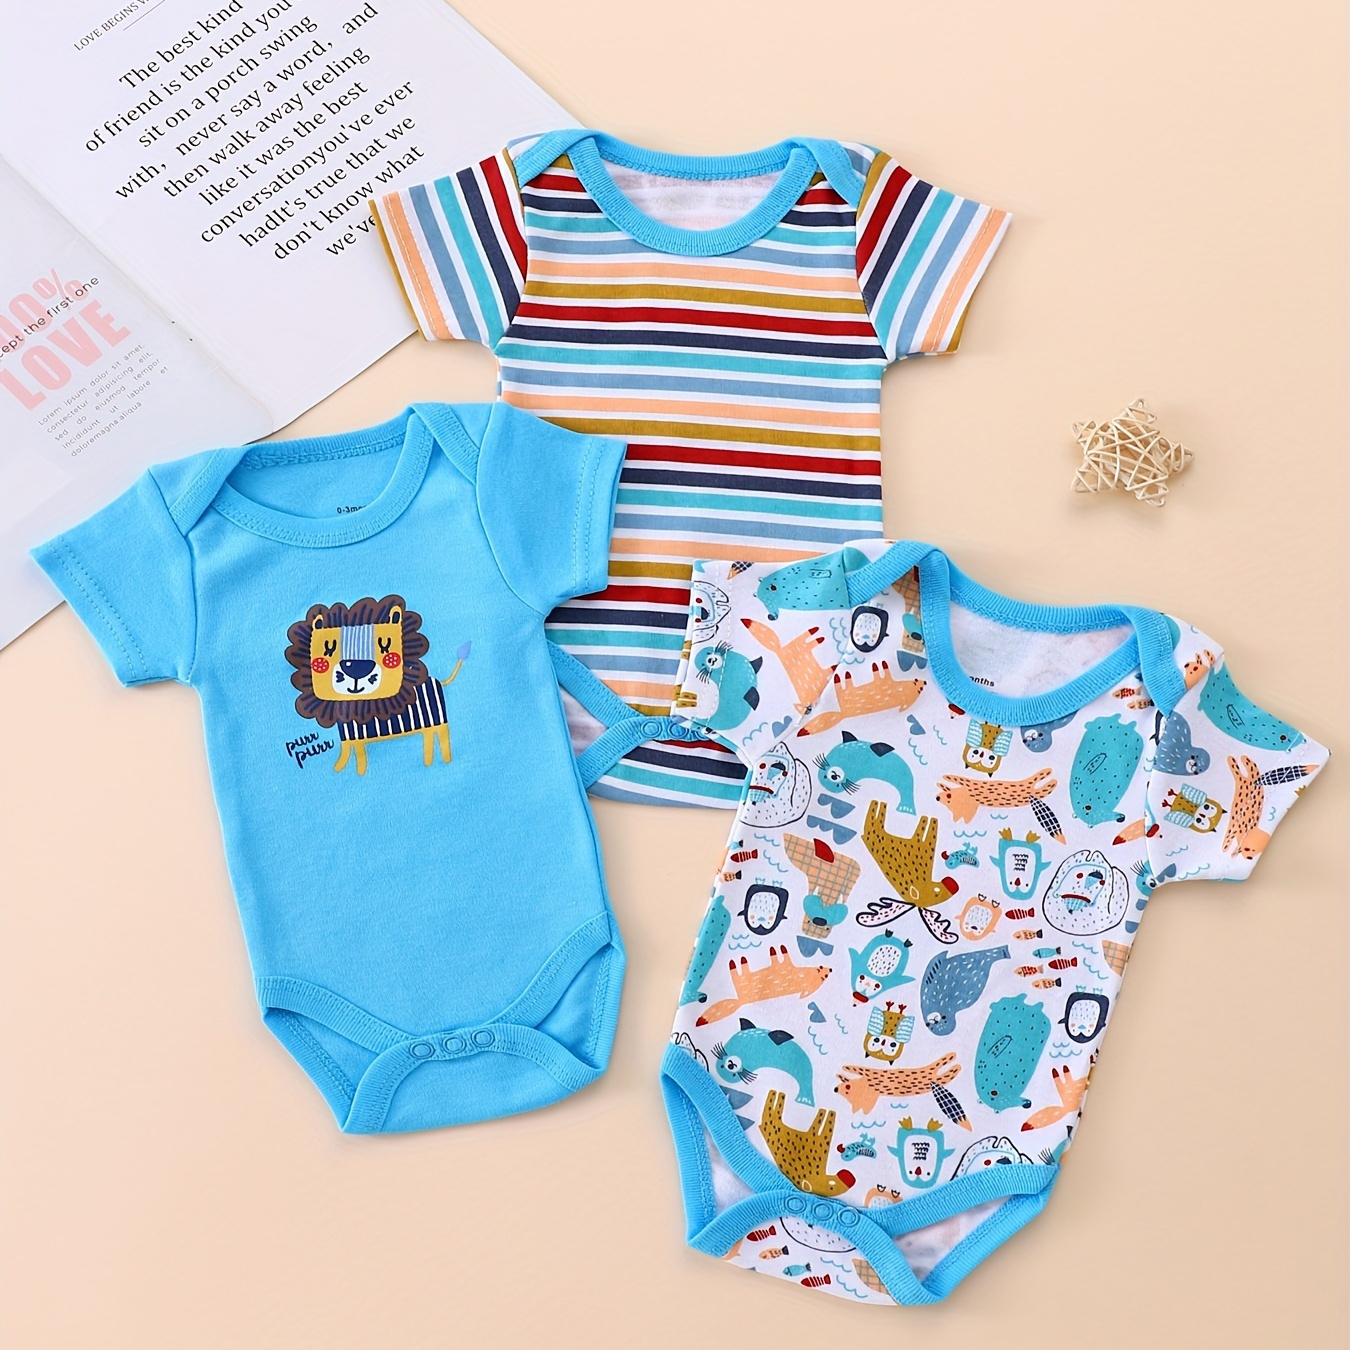 

3-pack Baby Boy;s Short Sleeve 100% Cotton Onesies, Cute Lion & Animal Print Bodysuits, Summer Infant Rompers - Adorable Style